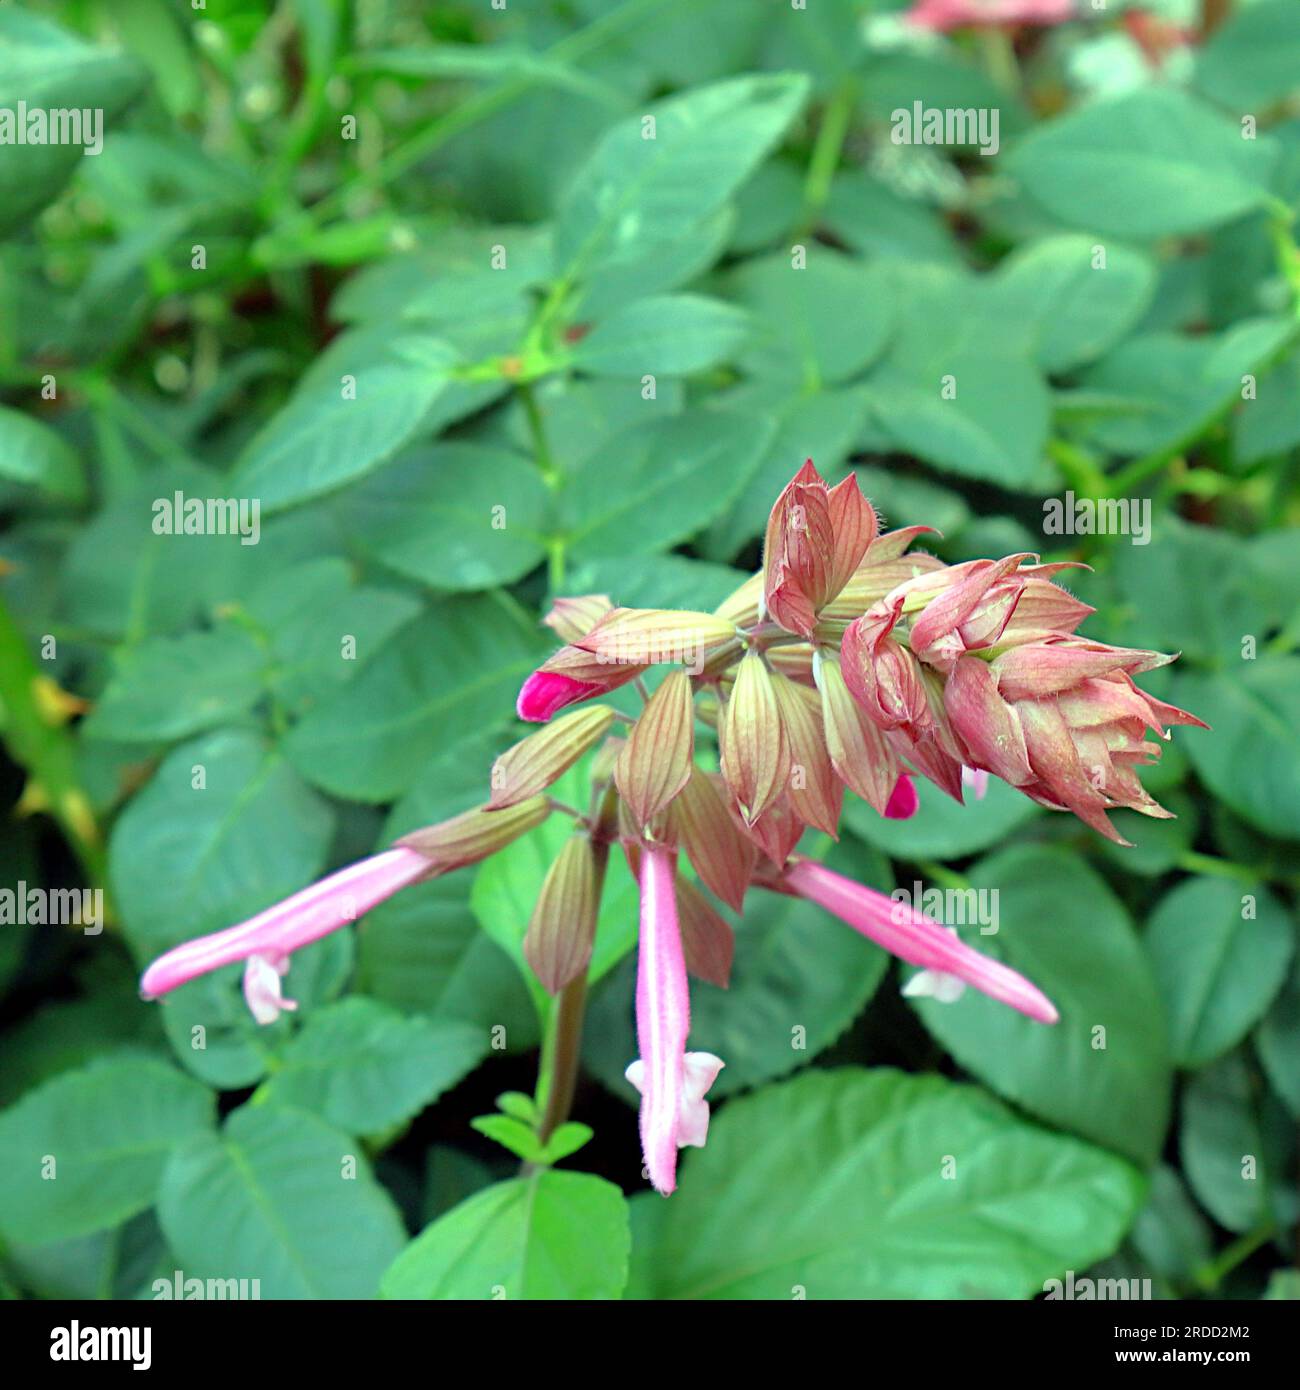 Skyscraper Pink Salvia flowers, often referred to as sage, set against a background of green leaves and foliage. Stock Photo